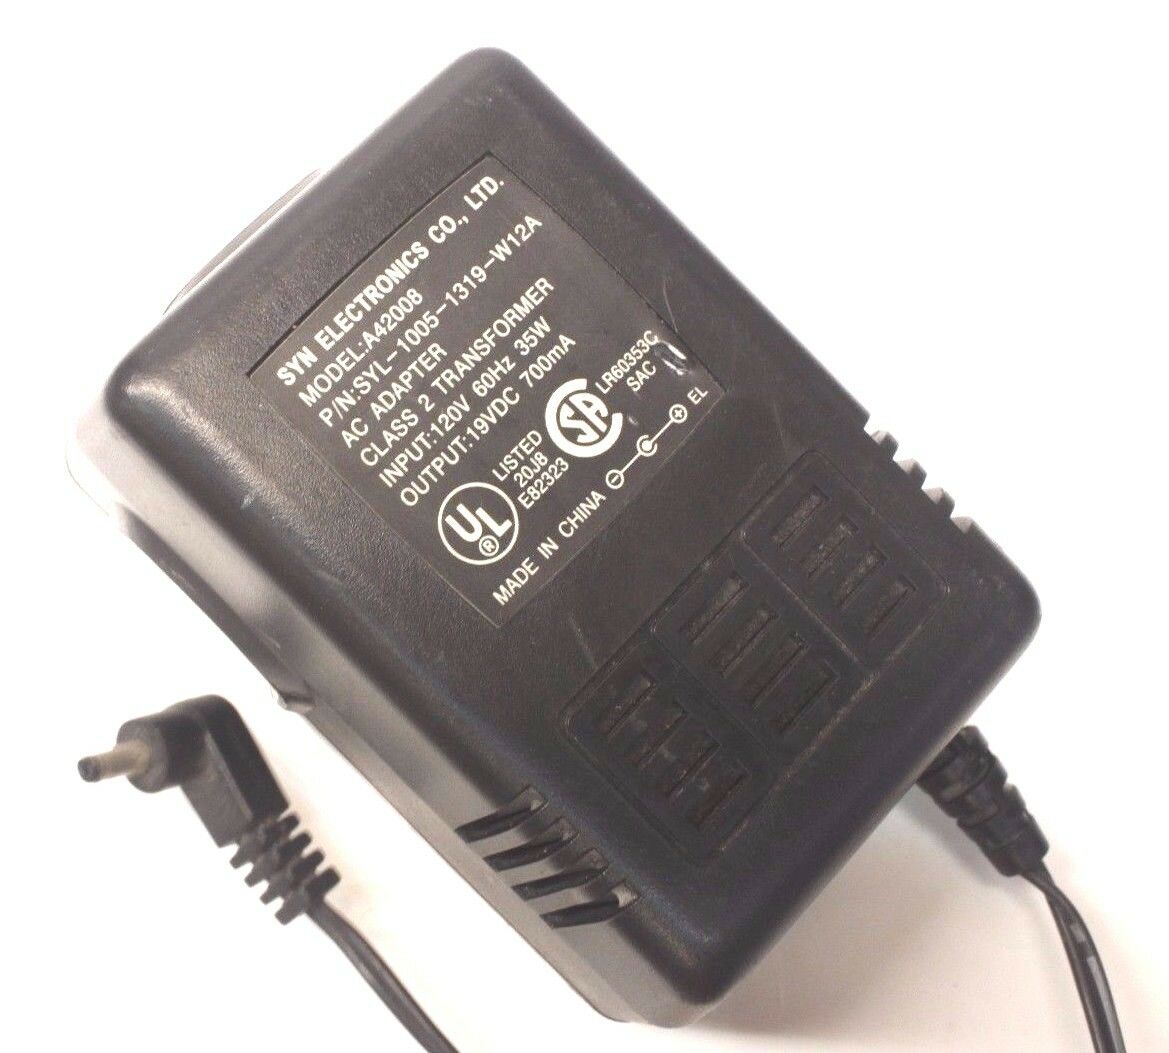 New 19V 0.7A Syn Electronics A42008 SYL-1005-1319-W12A Power Supply Ac Adapter